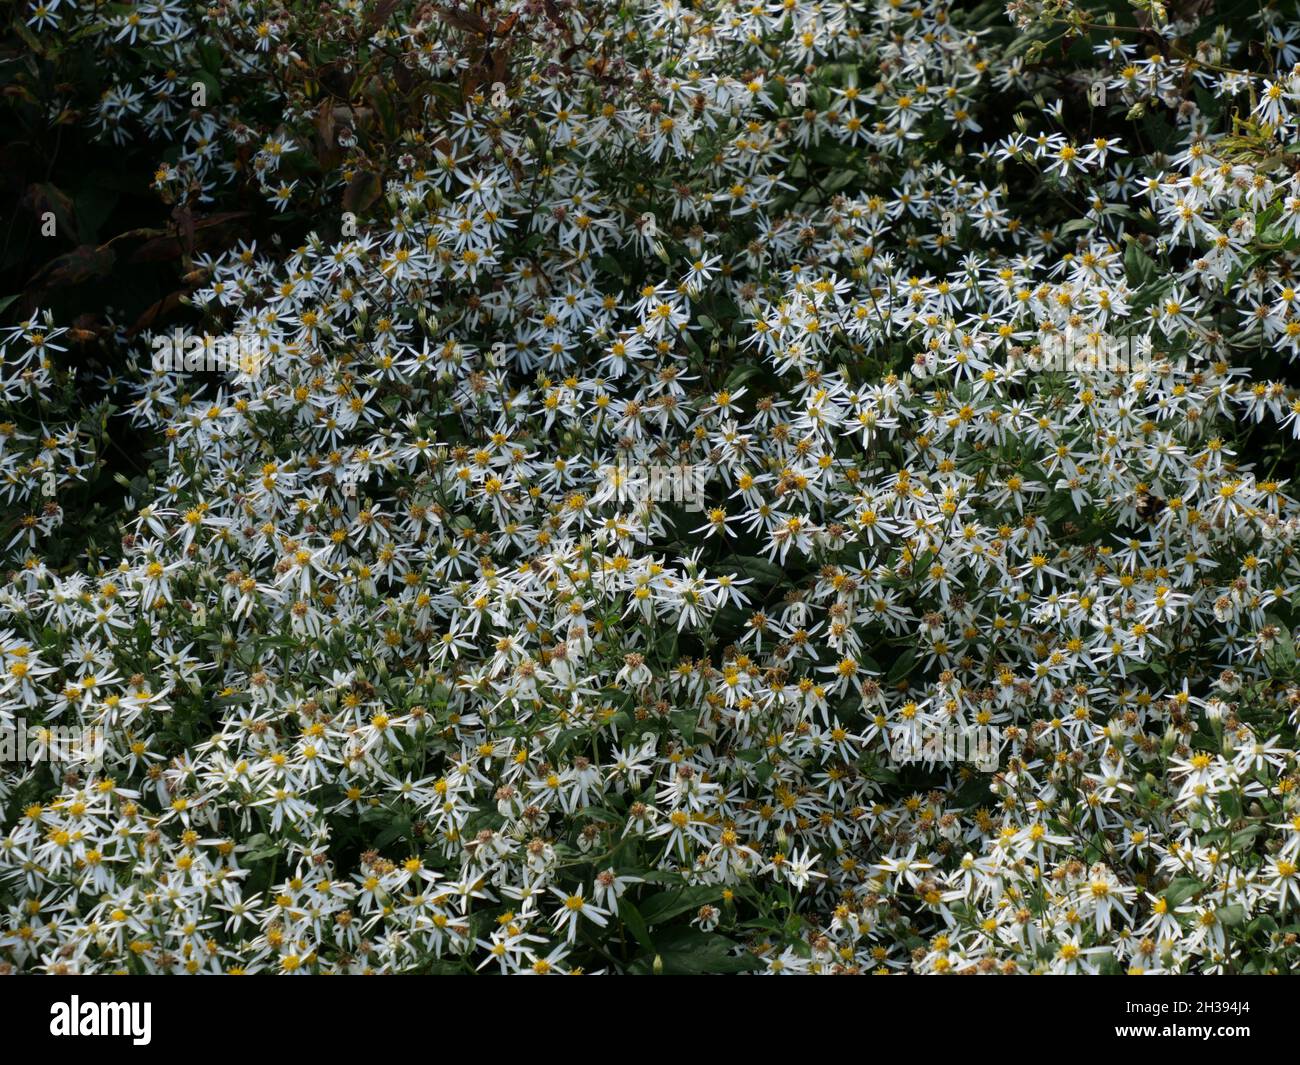 Field of white wood aster flowers Stock Photo